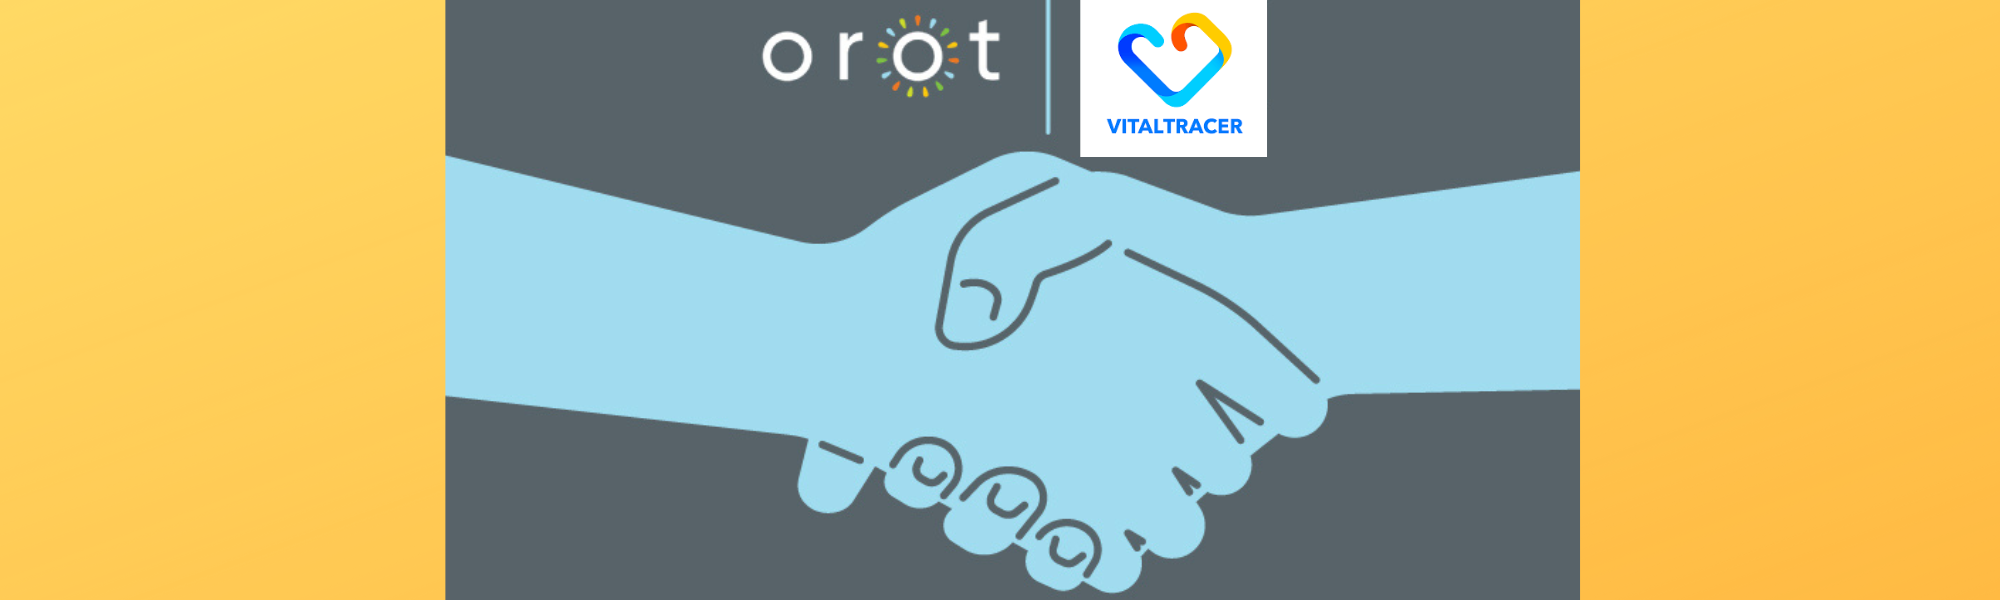 OROT partners with VitalTracer